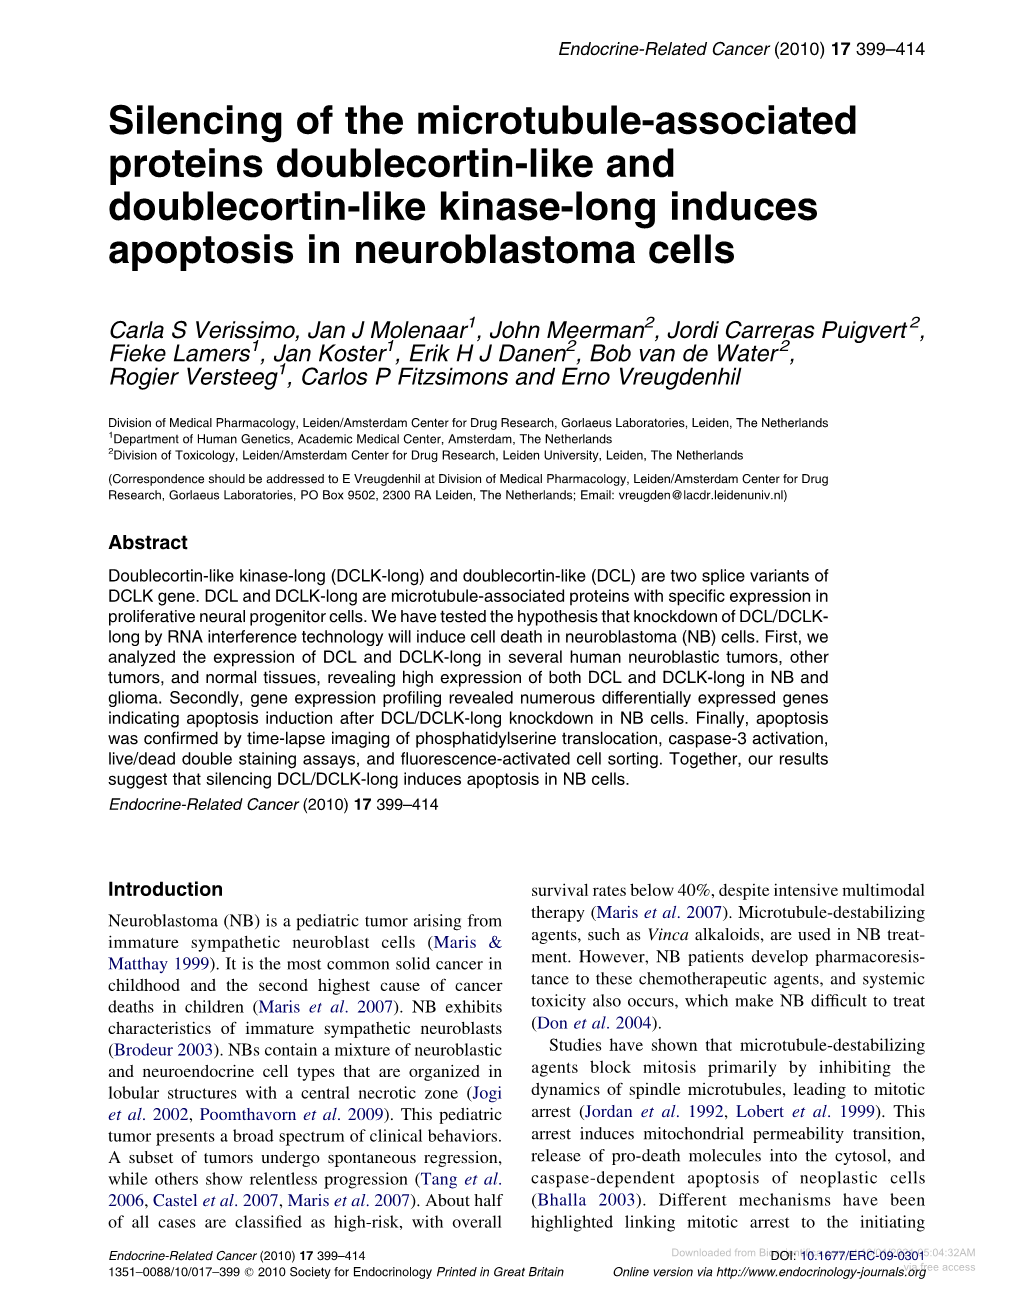 Silencing of the Microtubule-Associated Proteins Doublecortin-Like and Doublecortin-Like Kinase-Long Induces Apoptosis in Neuroblastoma Cells